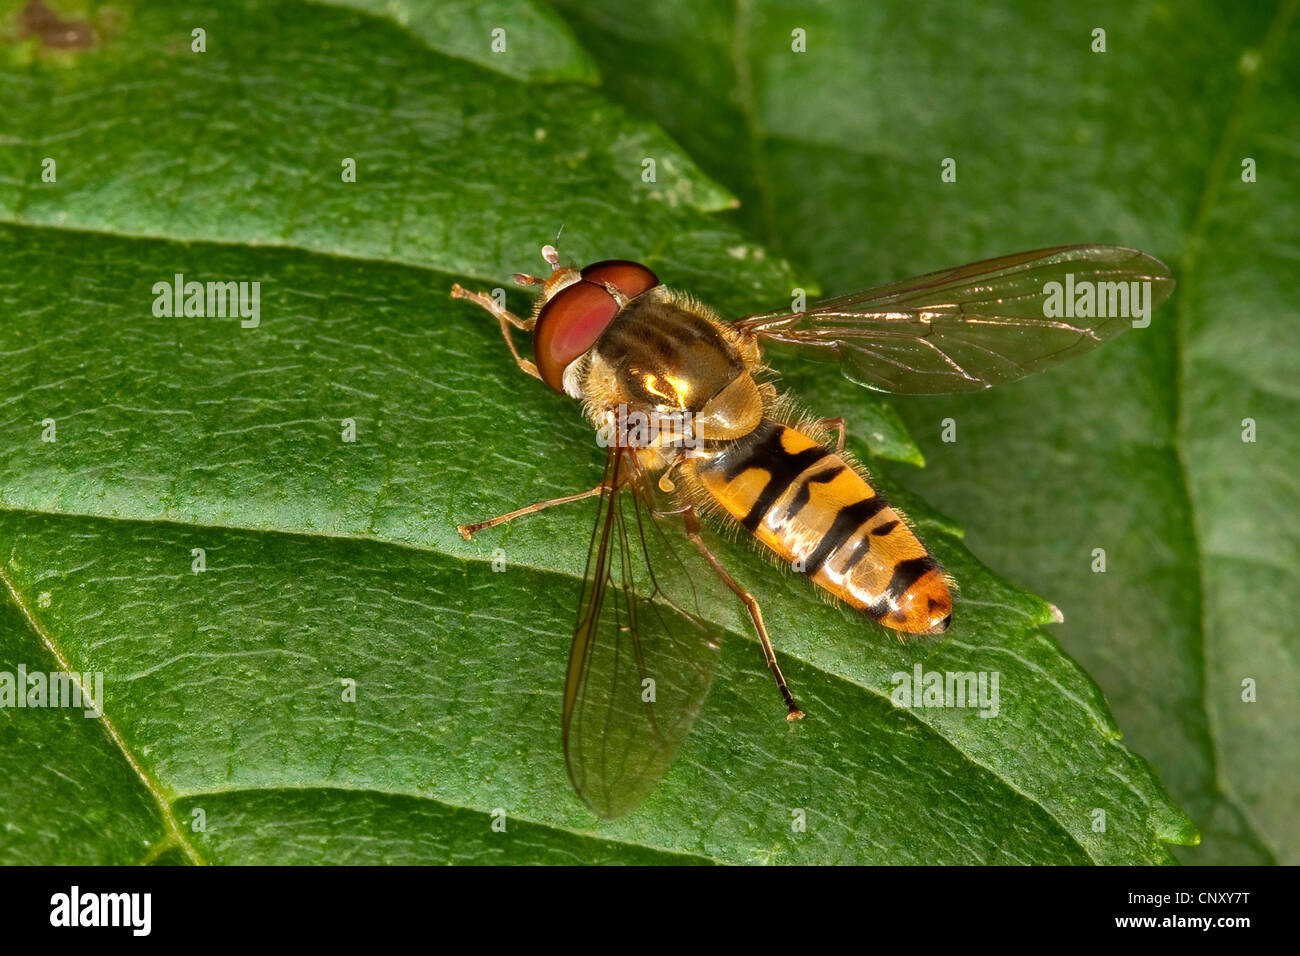 Marmalade hoverfly (Episyrphus balteatus), siting on a leaf, Germany Stock Photo